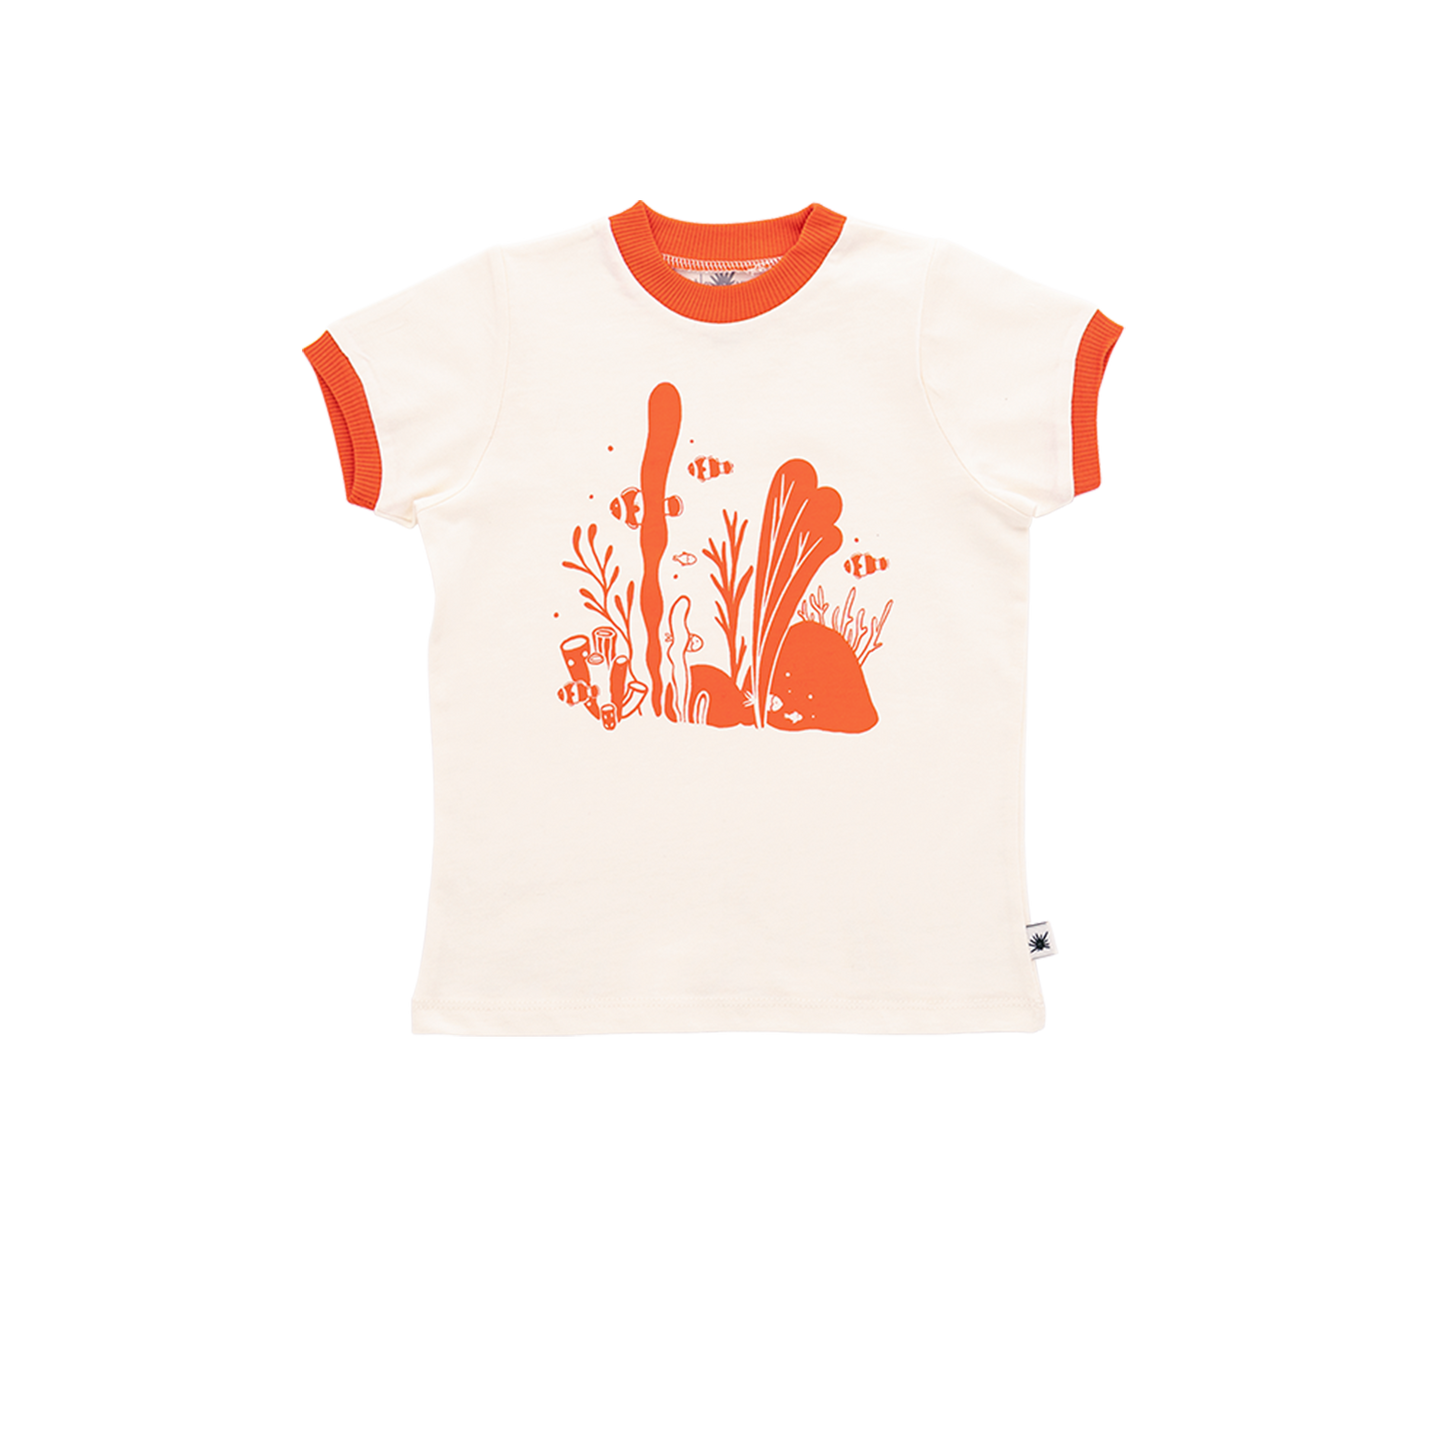 Sporty T-shirt - Aged 6m to 7 Yrs- Colored Offwhite-Orange